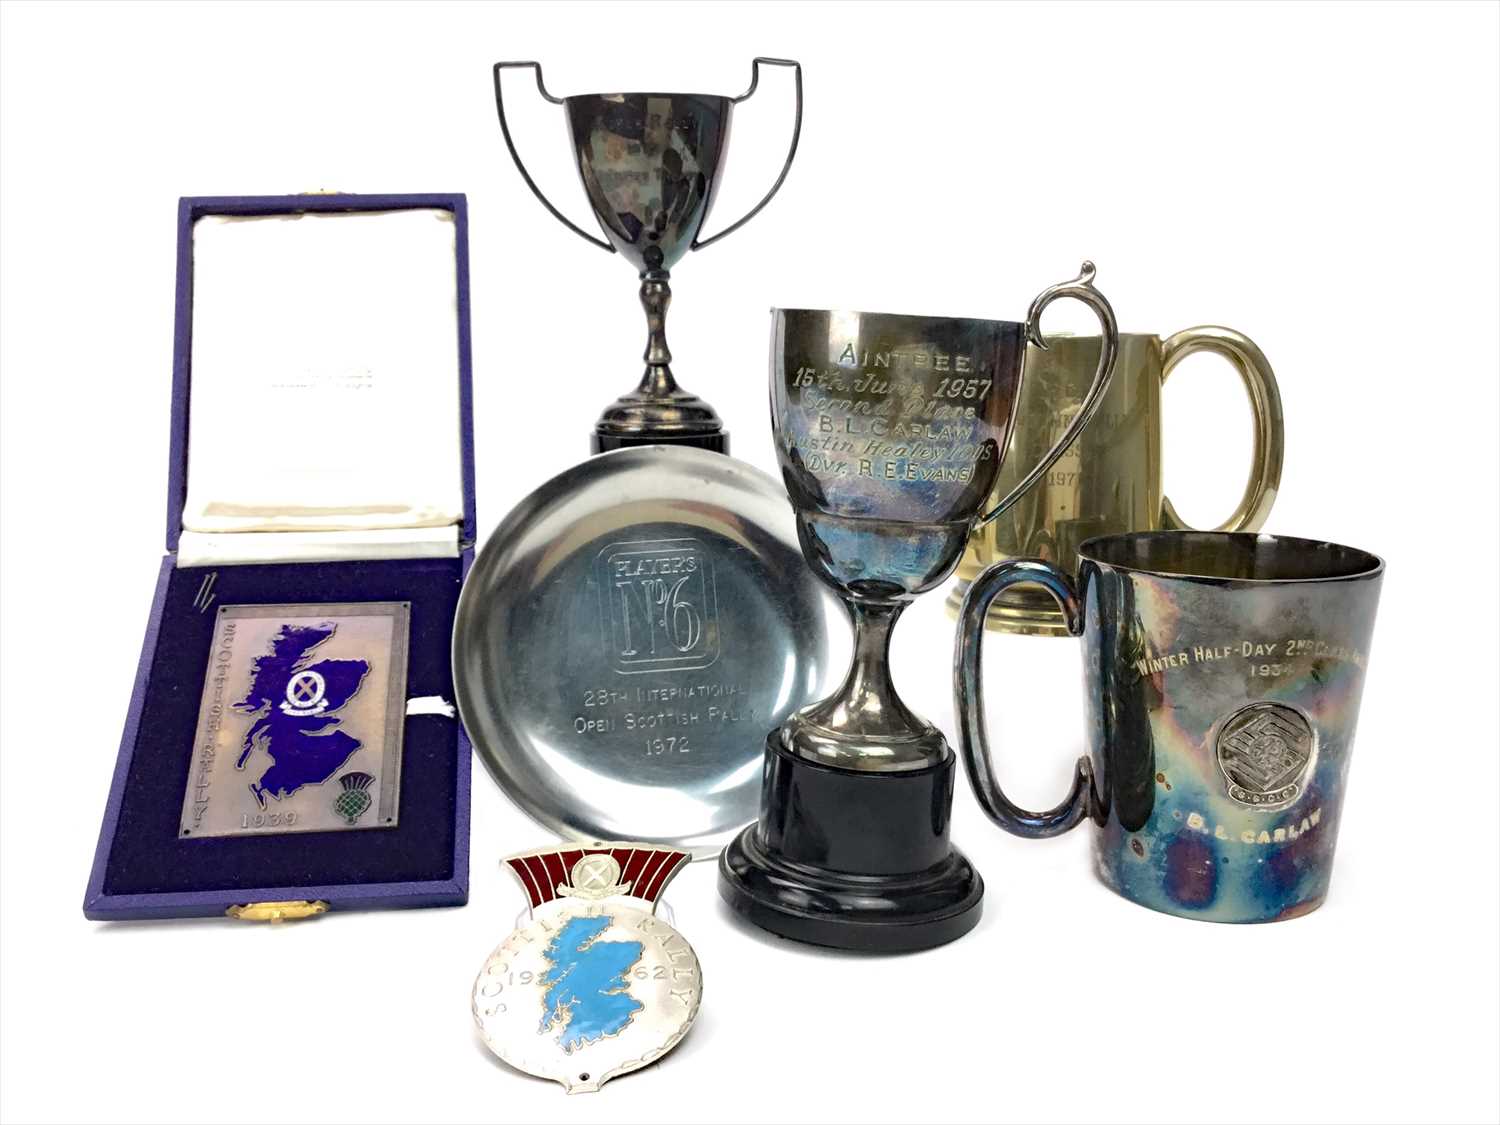 Lot 1723 - RACING INTEREST - MID-CENTURY RACING TROPHIES ALONG WITH TWO ENAMEL BADGES